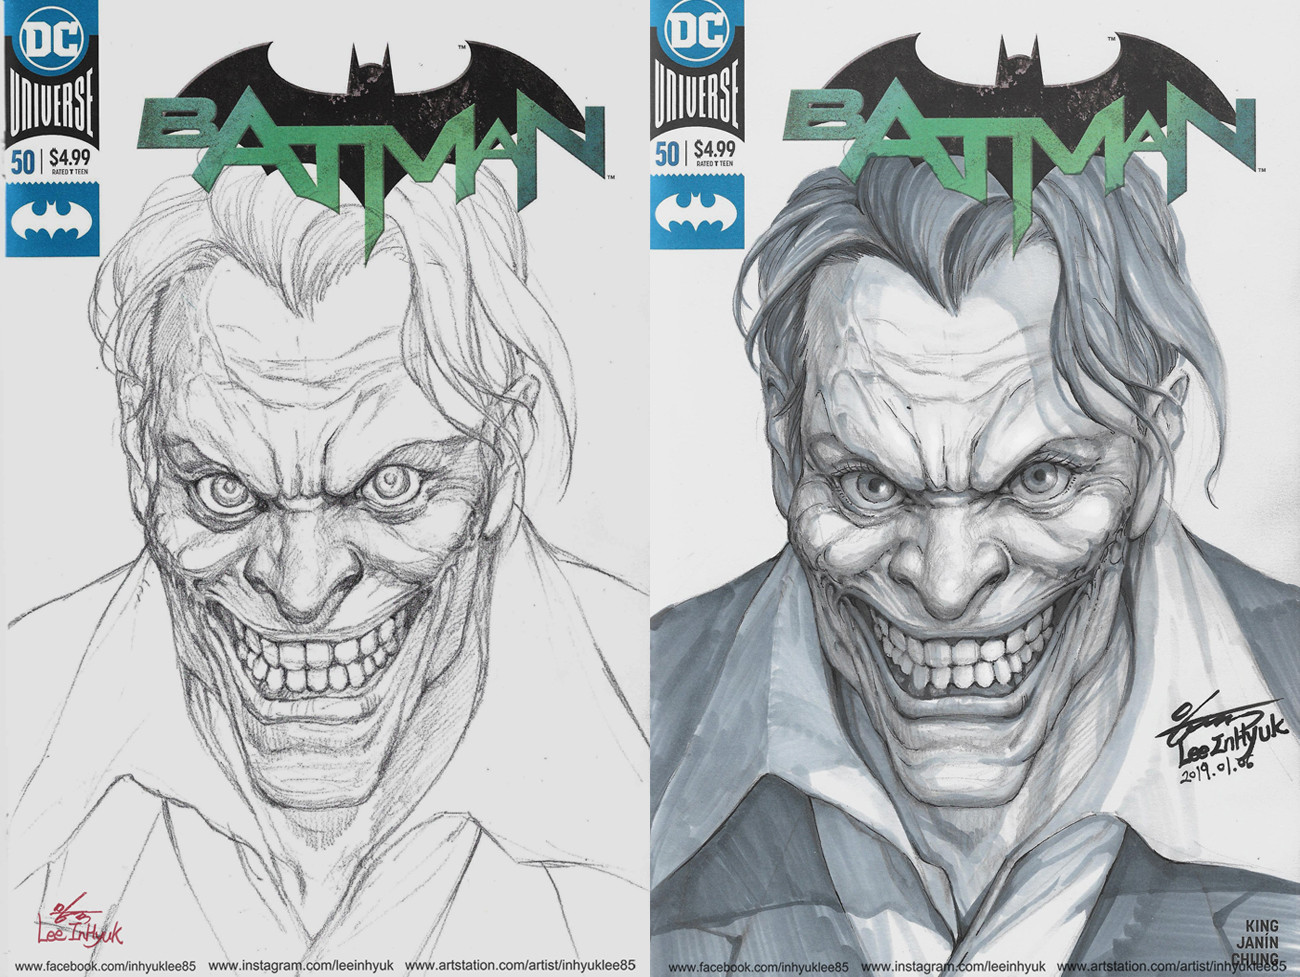 Joker / Blank cover /Pencil and InK